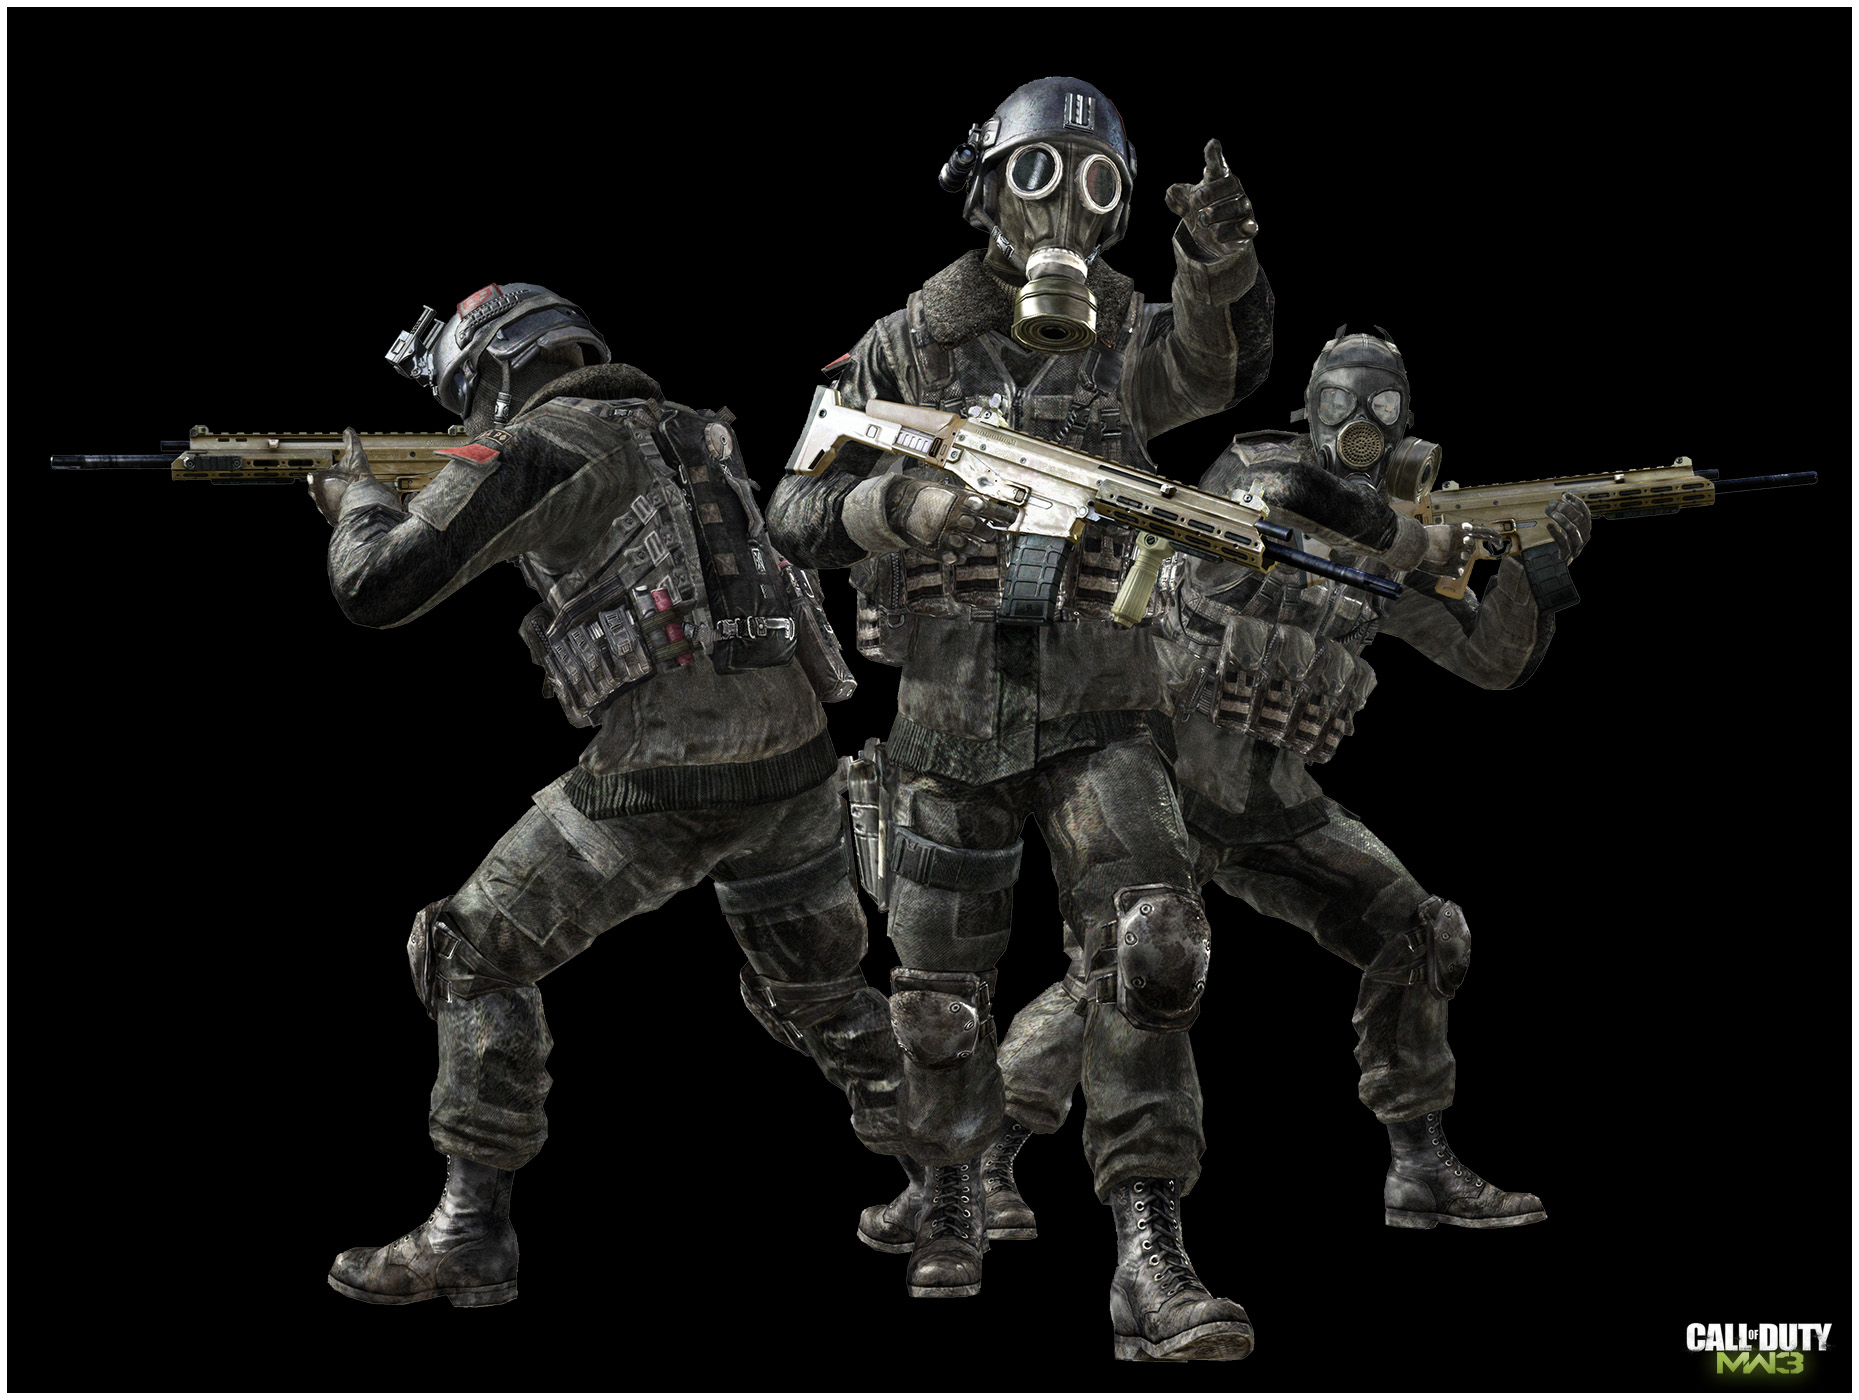 Call of Duty Modern Warfare 3 Spec Ops Images  The Call of Duty Wiki